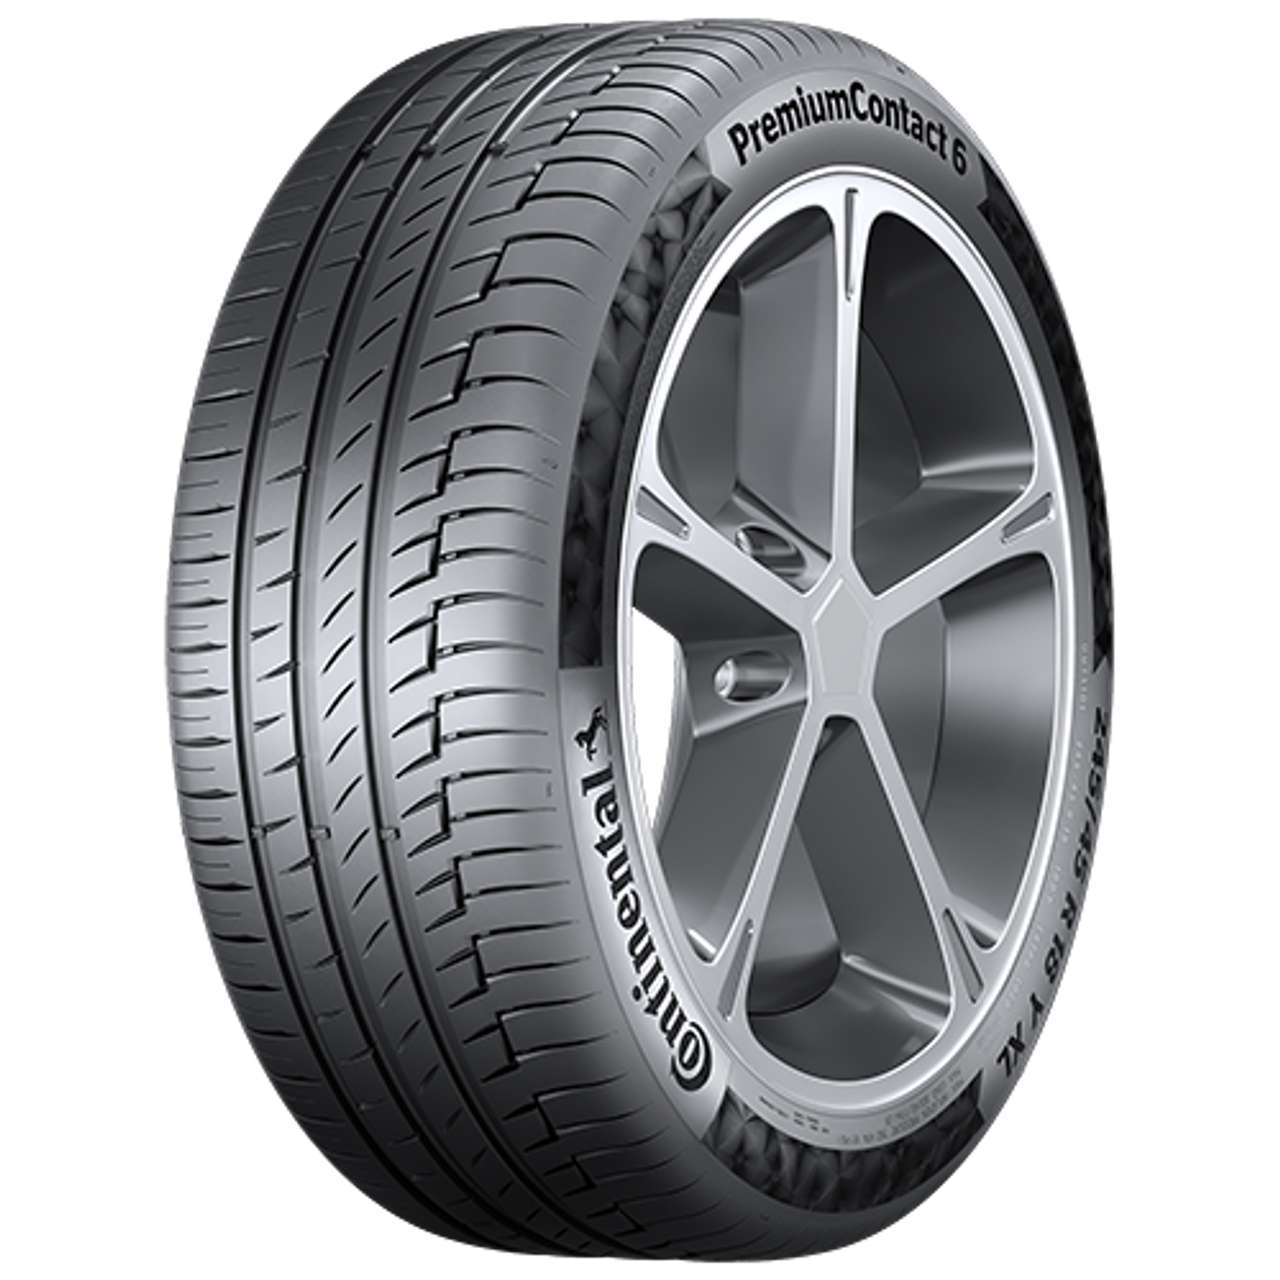 CONTINENTAL PREMIUMCONTACT 6 (MO-S) (EVc) 325/40R22 114Y CONTISILENT FR